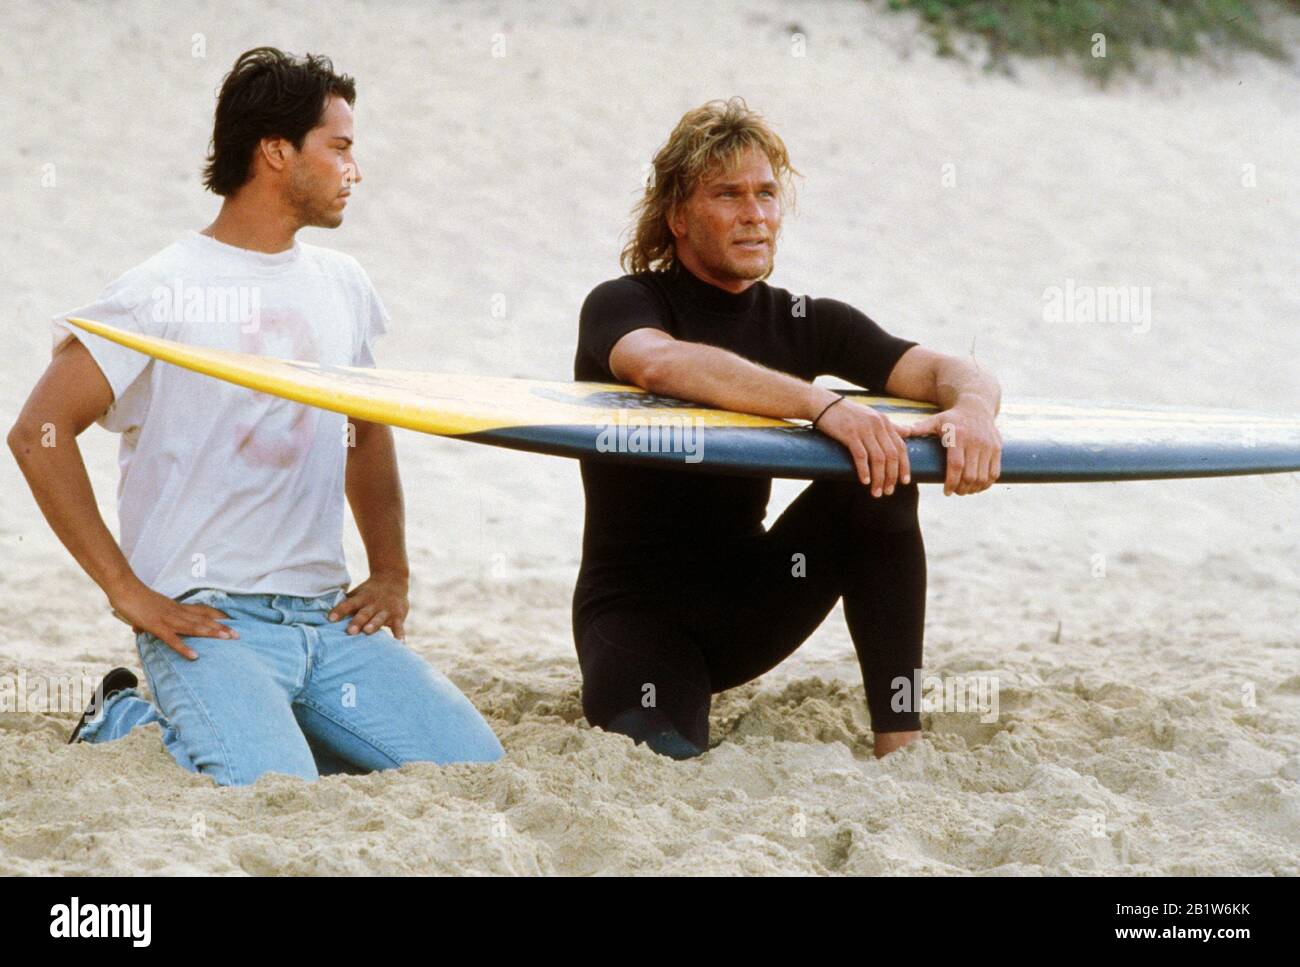 Keanu Reeves, Patrick Swayze, "Point Break" (1991) Photo Credit: Richard Foreman / 20th Century Fox / The Hollywood Archive File Reference # 33962-265THA Stockfoto